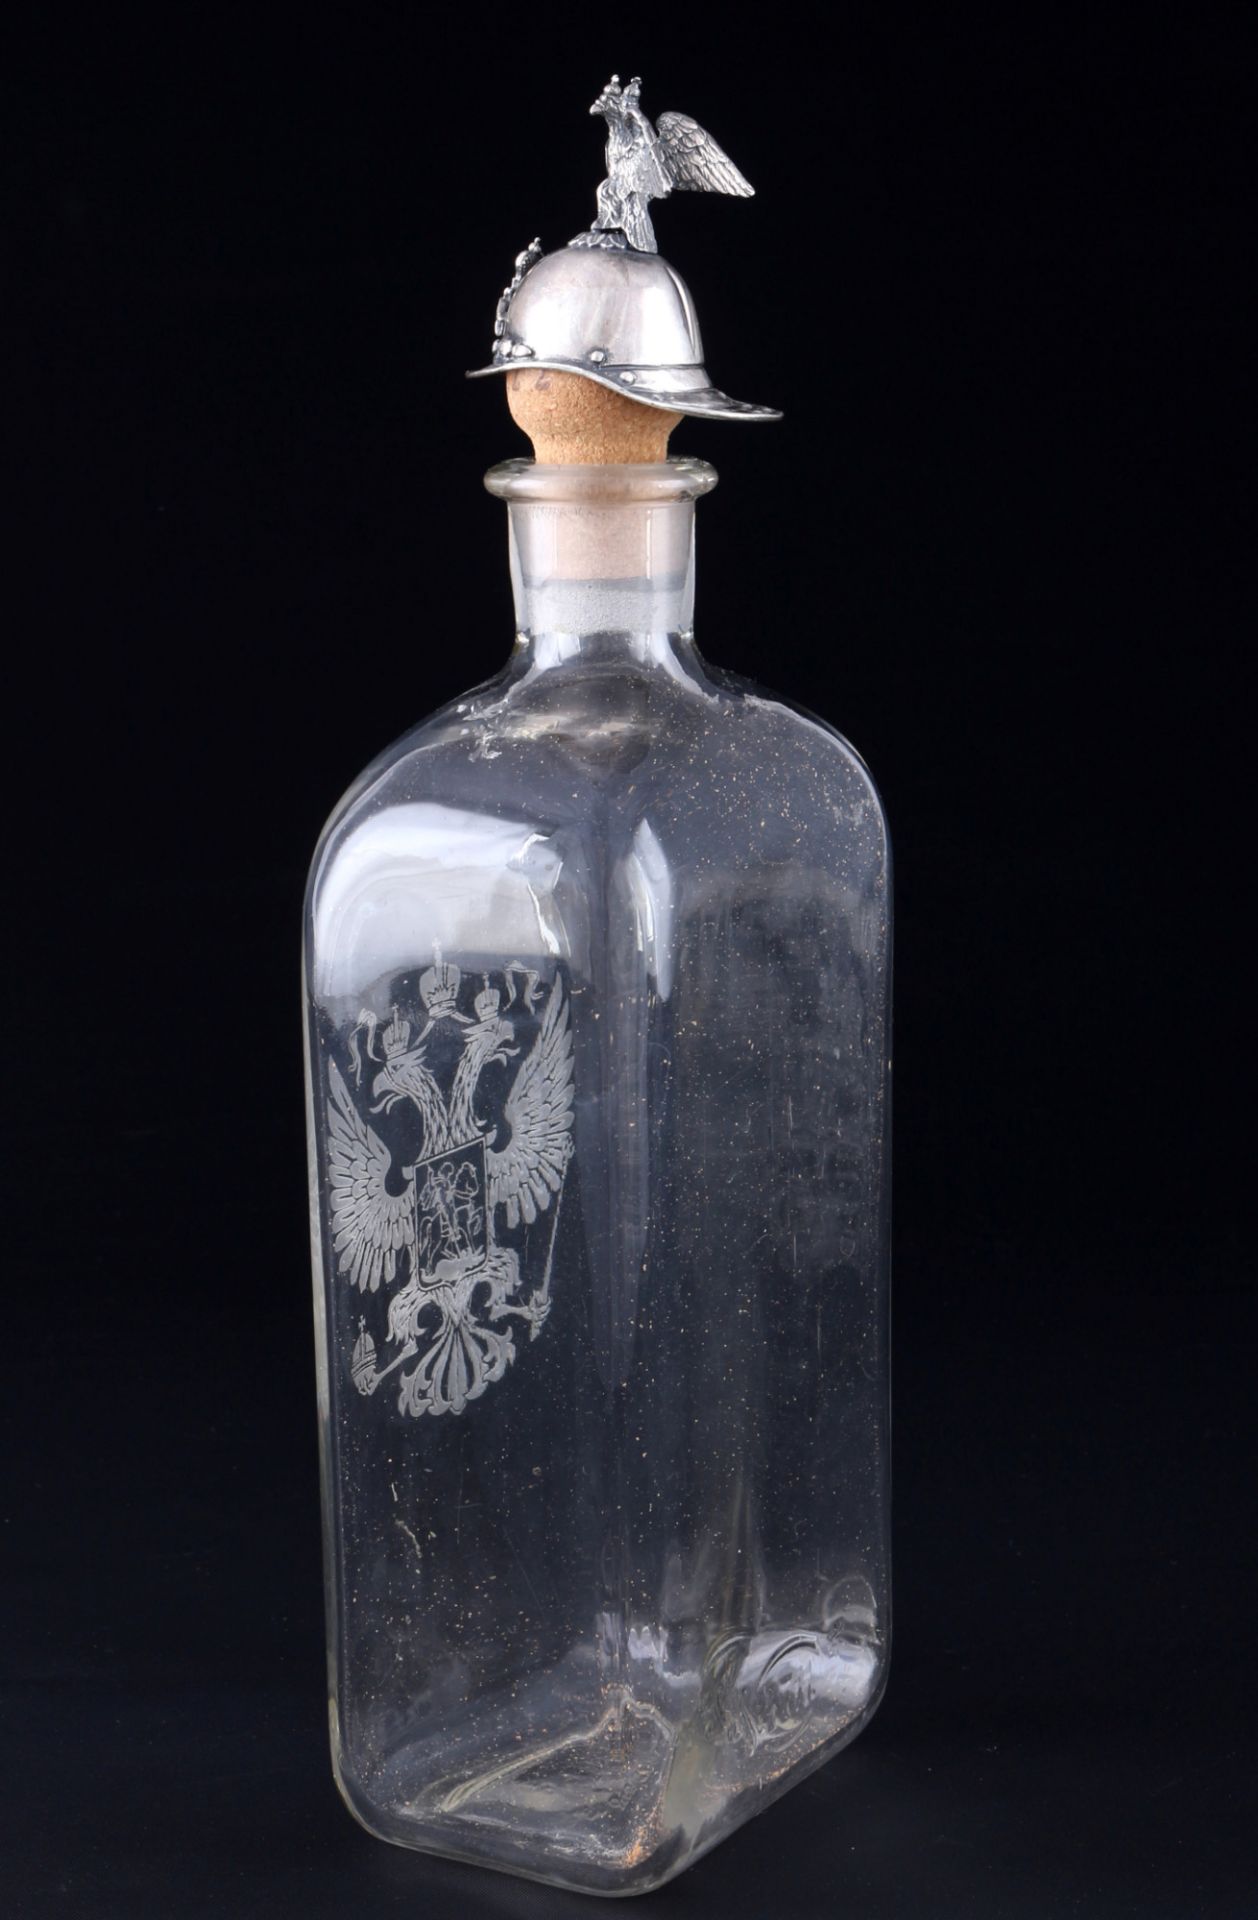 Silver carafe with double-headed eagle, 84 Zolotniki silver, - Image 3 of 4